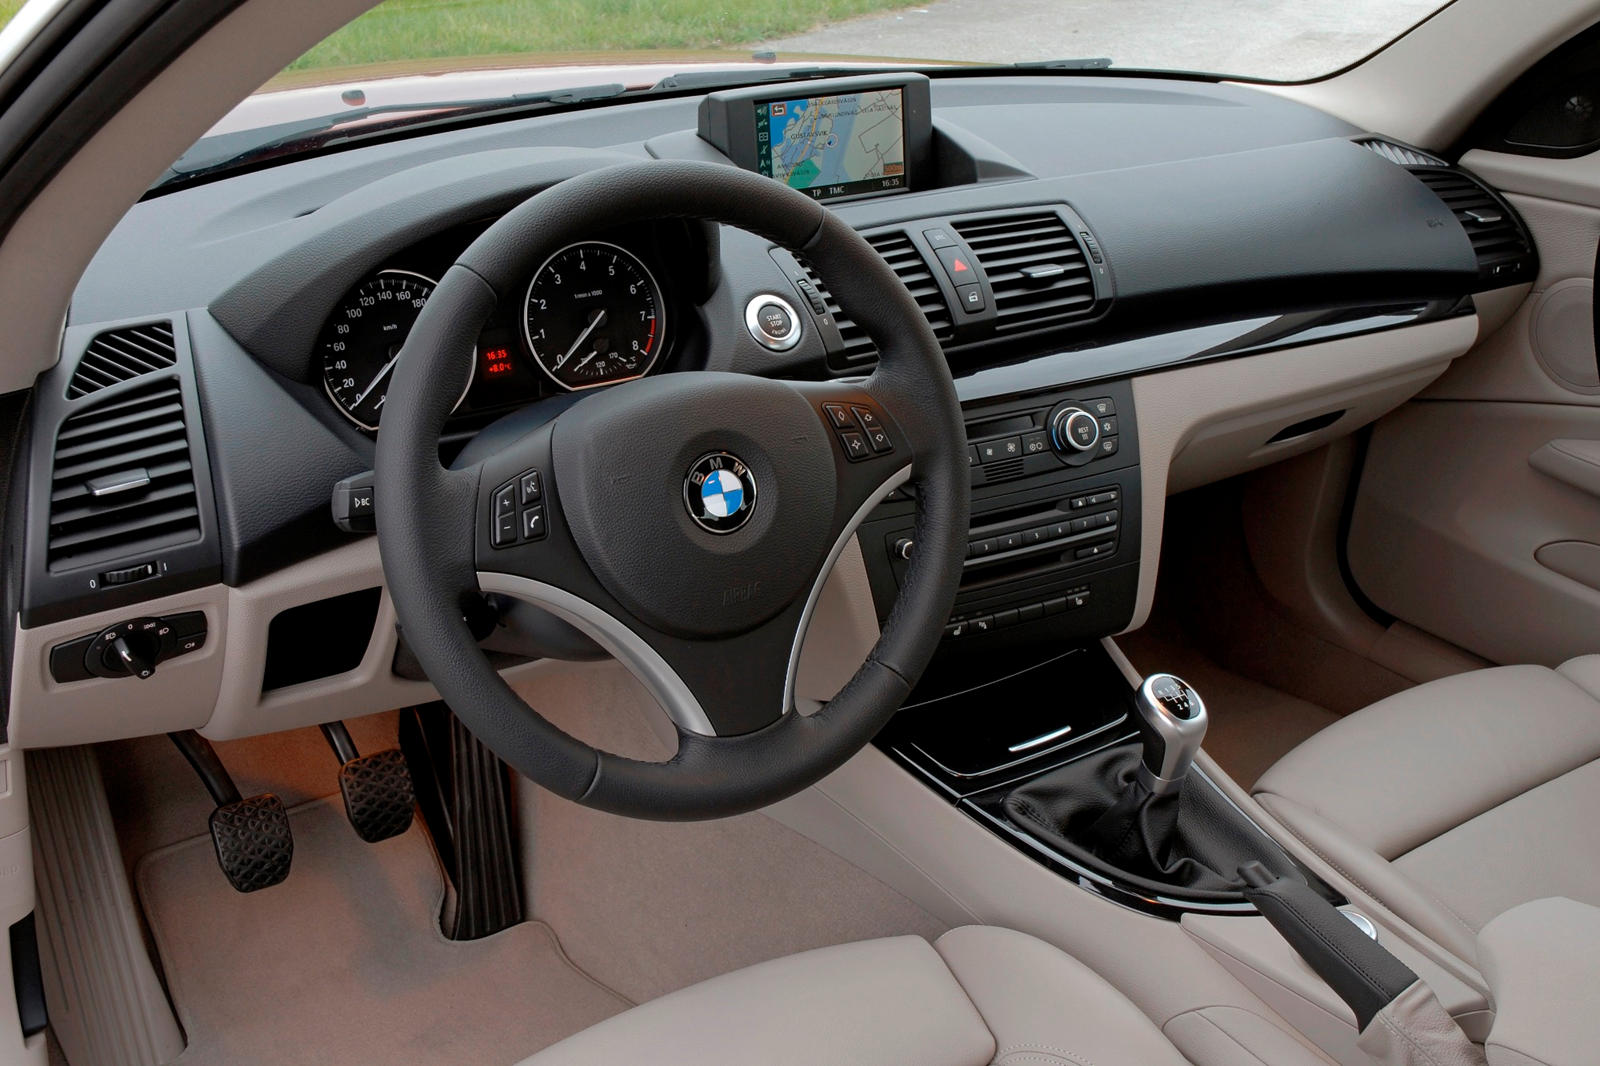 Approval brand Diversity 2009 BMW 1 Series Coupe Interior Photos | CarBuzz